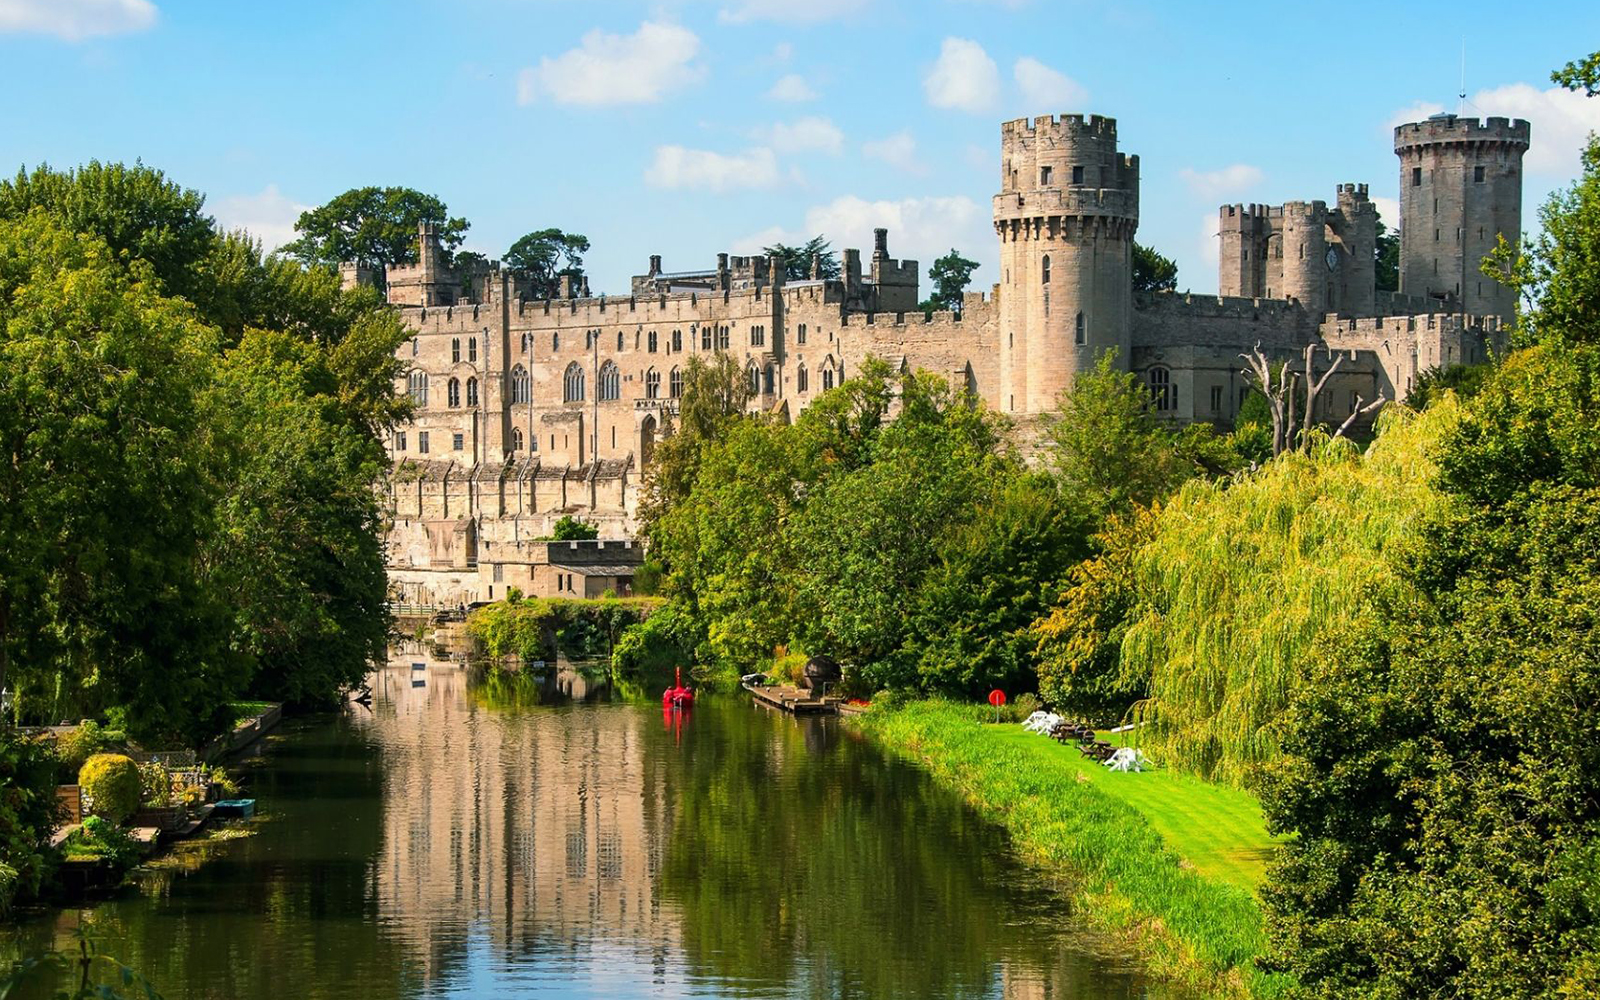 Image of Day Tour of Warwick Castle from London by Rail